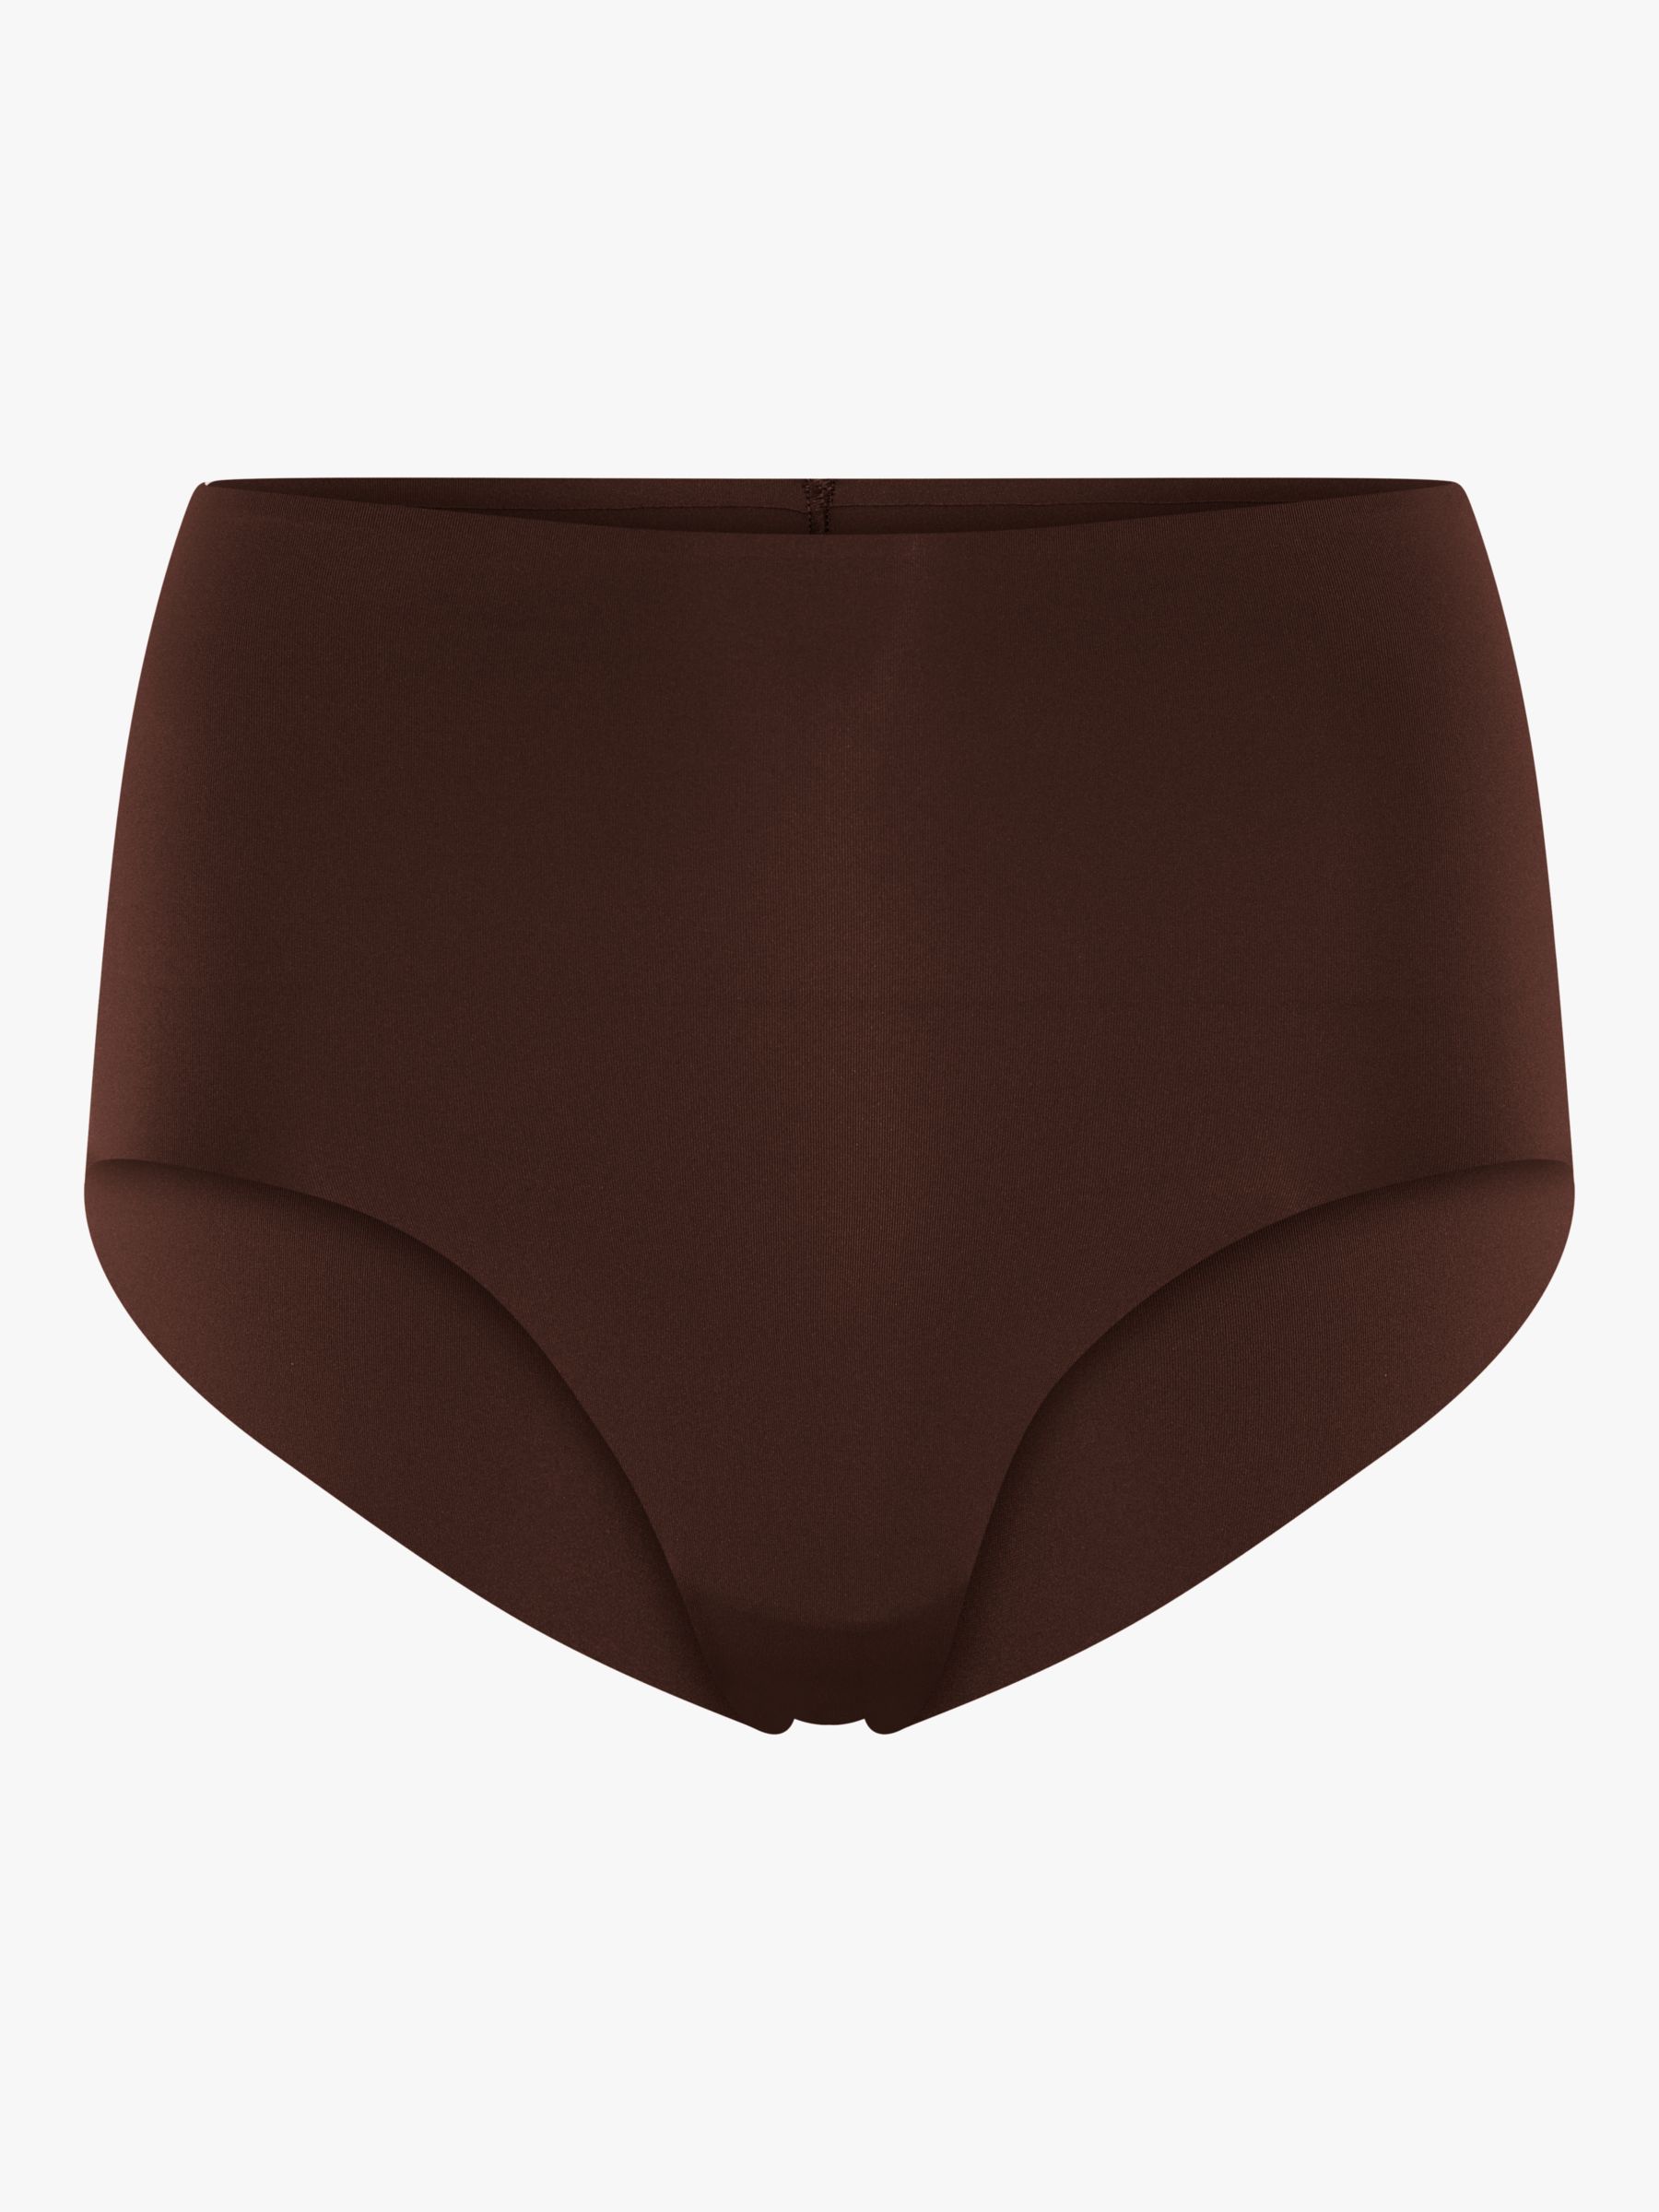 Girlfriend Collective, Sport Thong - Toast